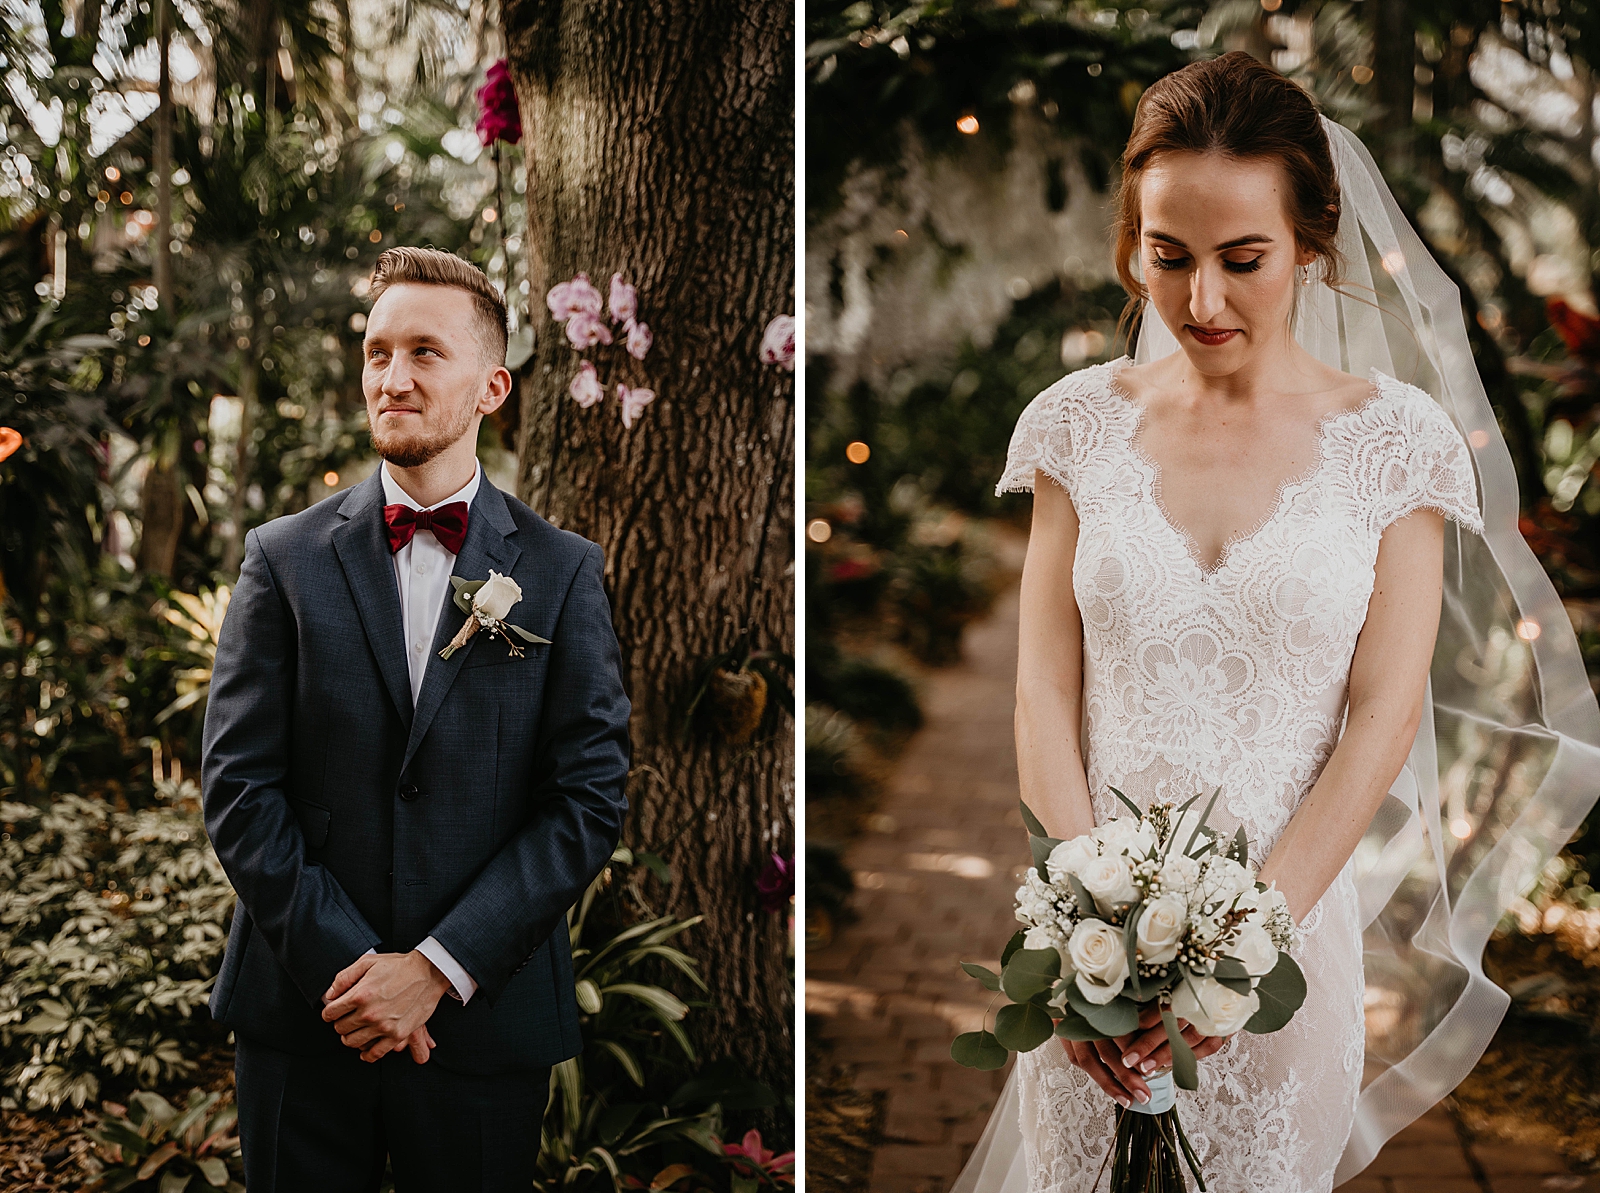 Individual Bride and Groom portraits with white boutonniere and bouquet in garden area Living Sculptures Sanctuary Wedding Photography captured by South Florida Wedding Photographer Krystal Capone Photography 